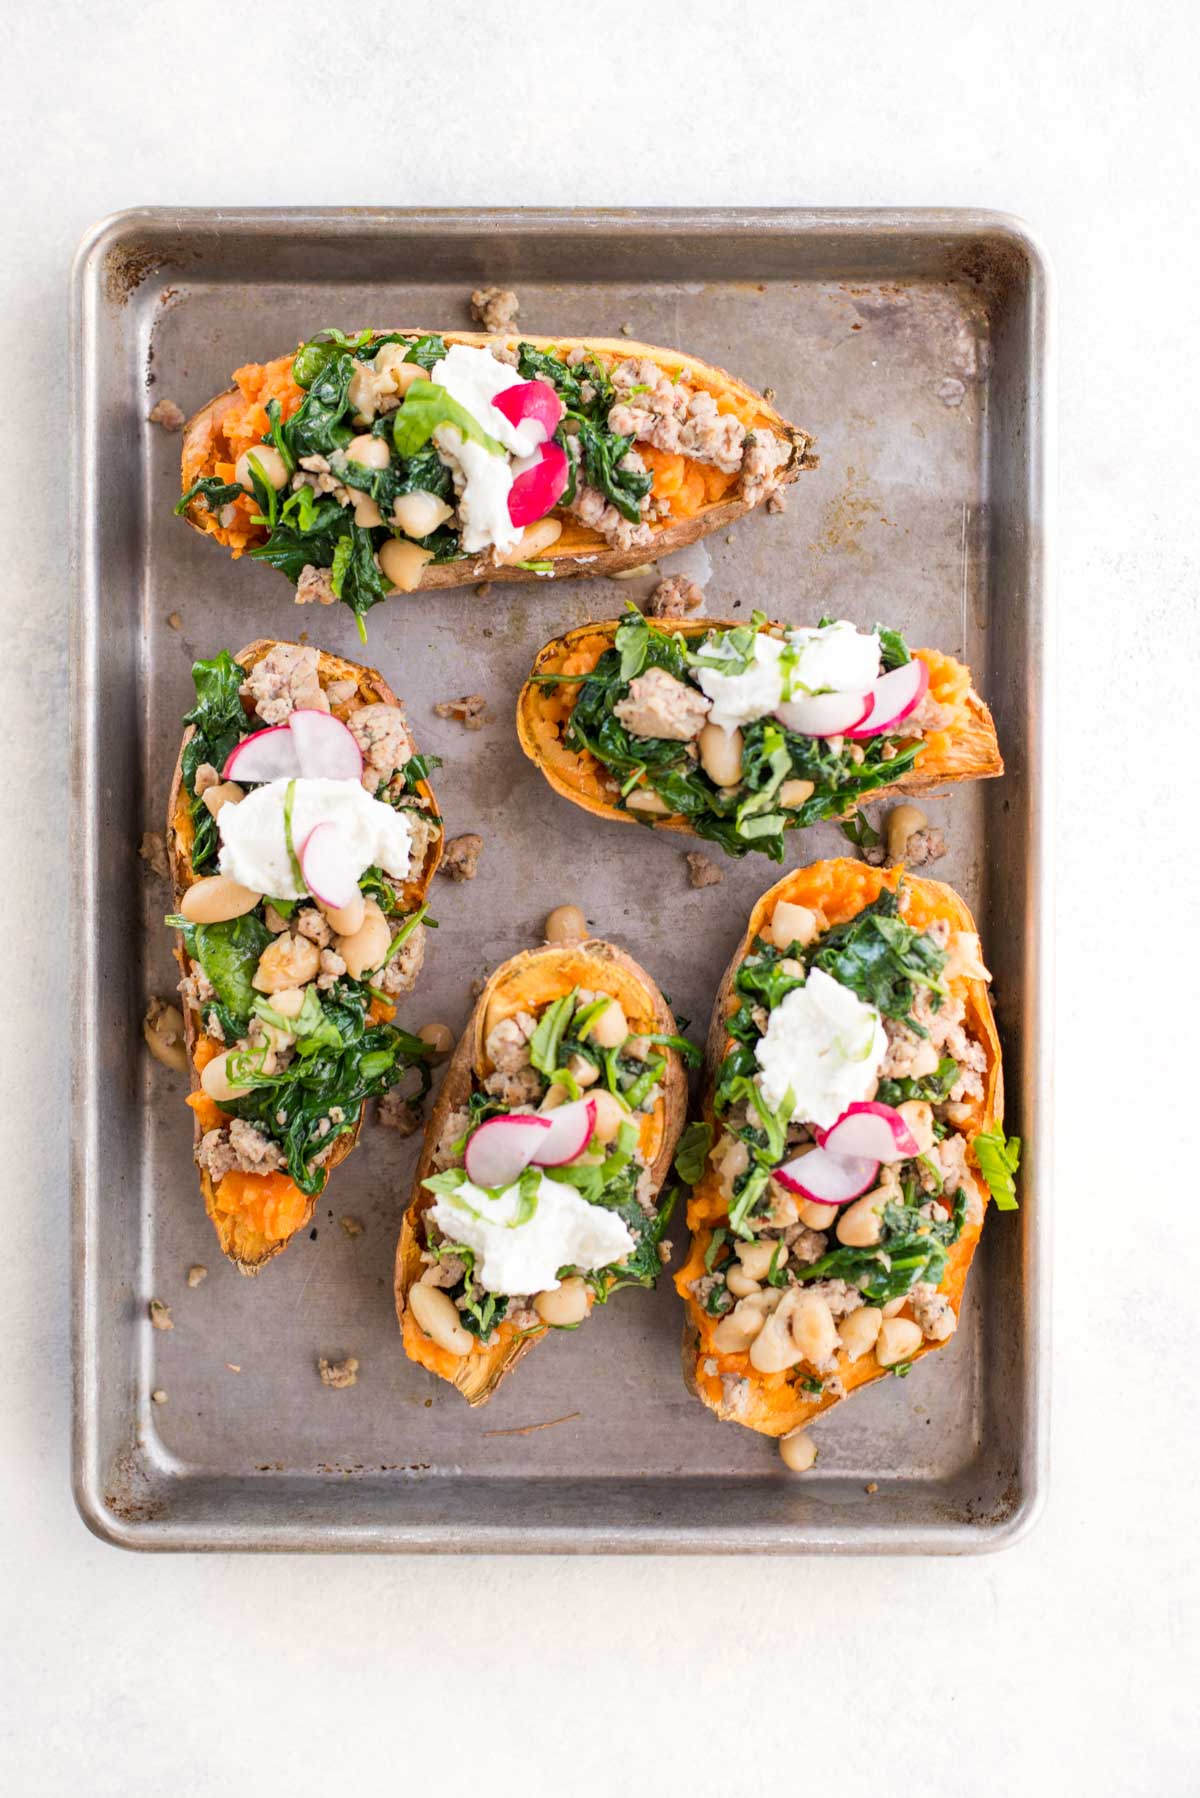 A quick 5-ingredient stuffed sweet potato you can eat anytime of day and anywhere. This is the easy way to eat healthy.